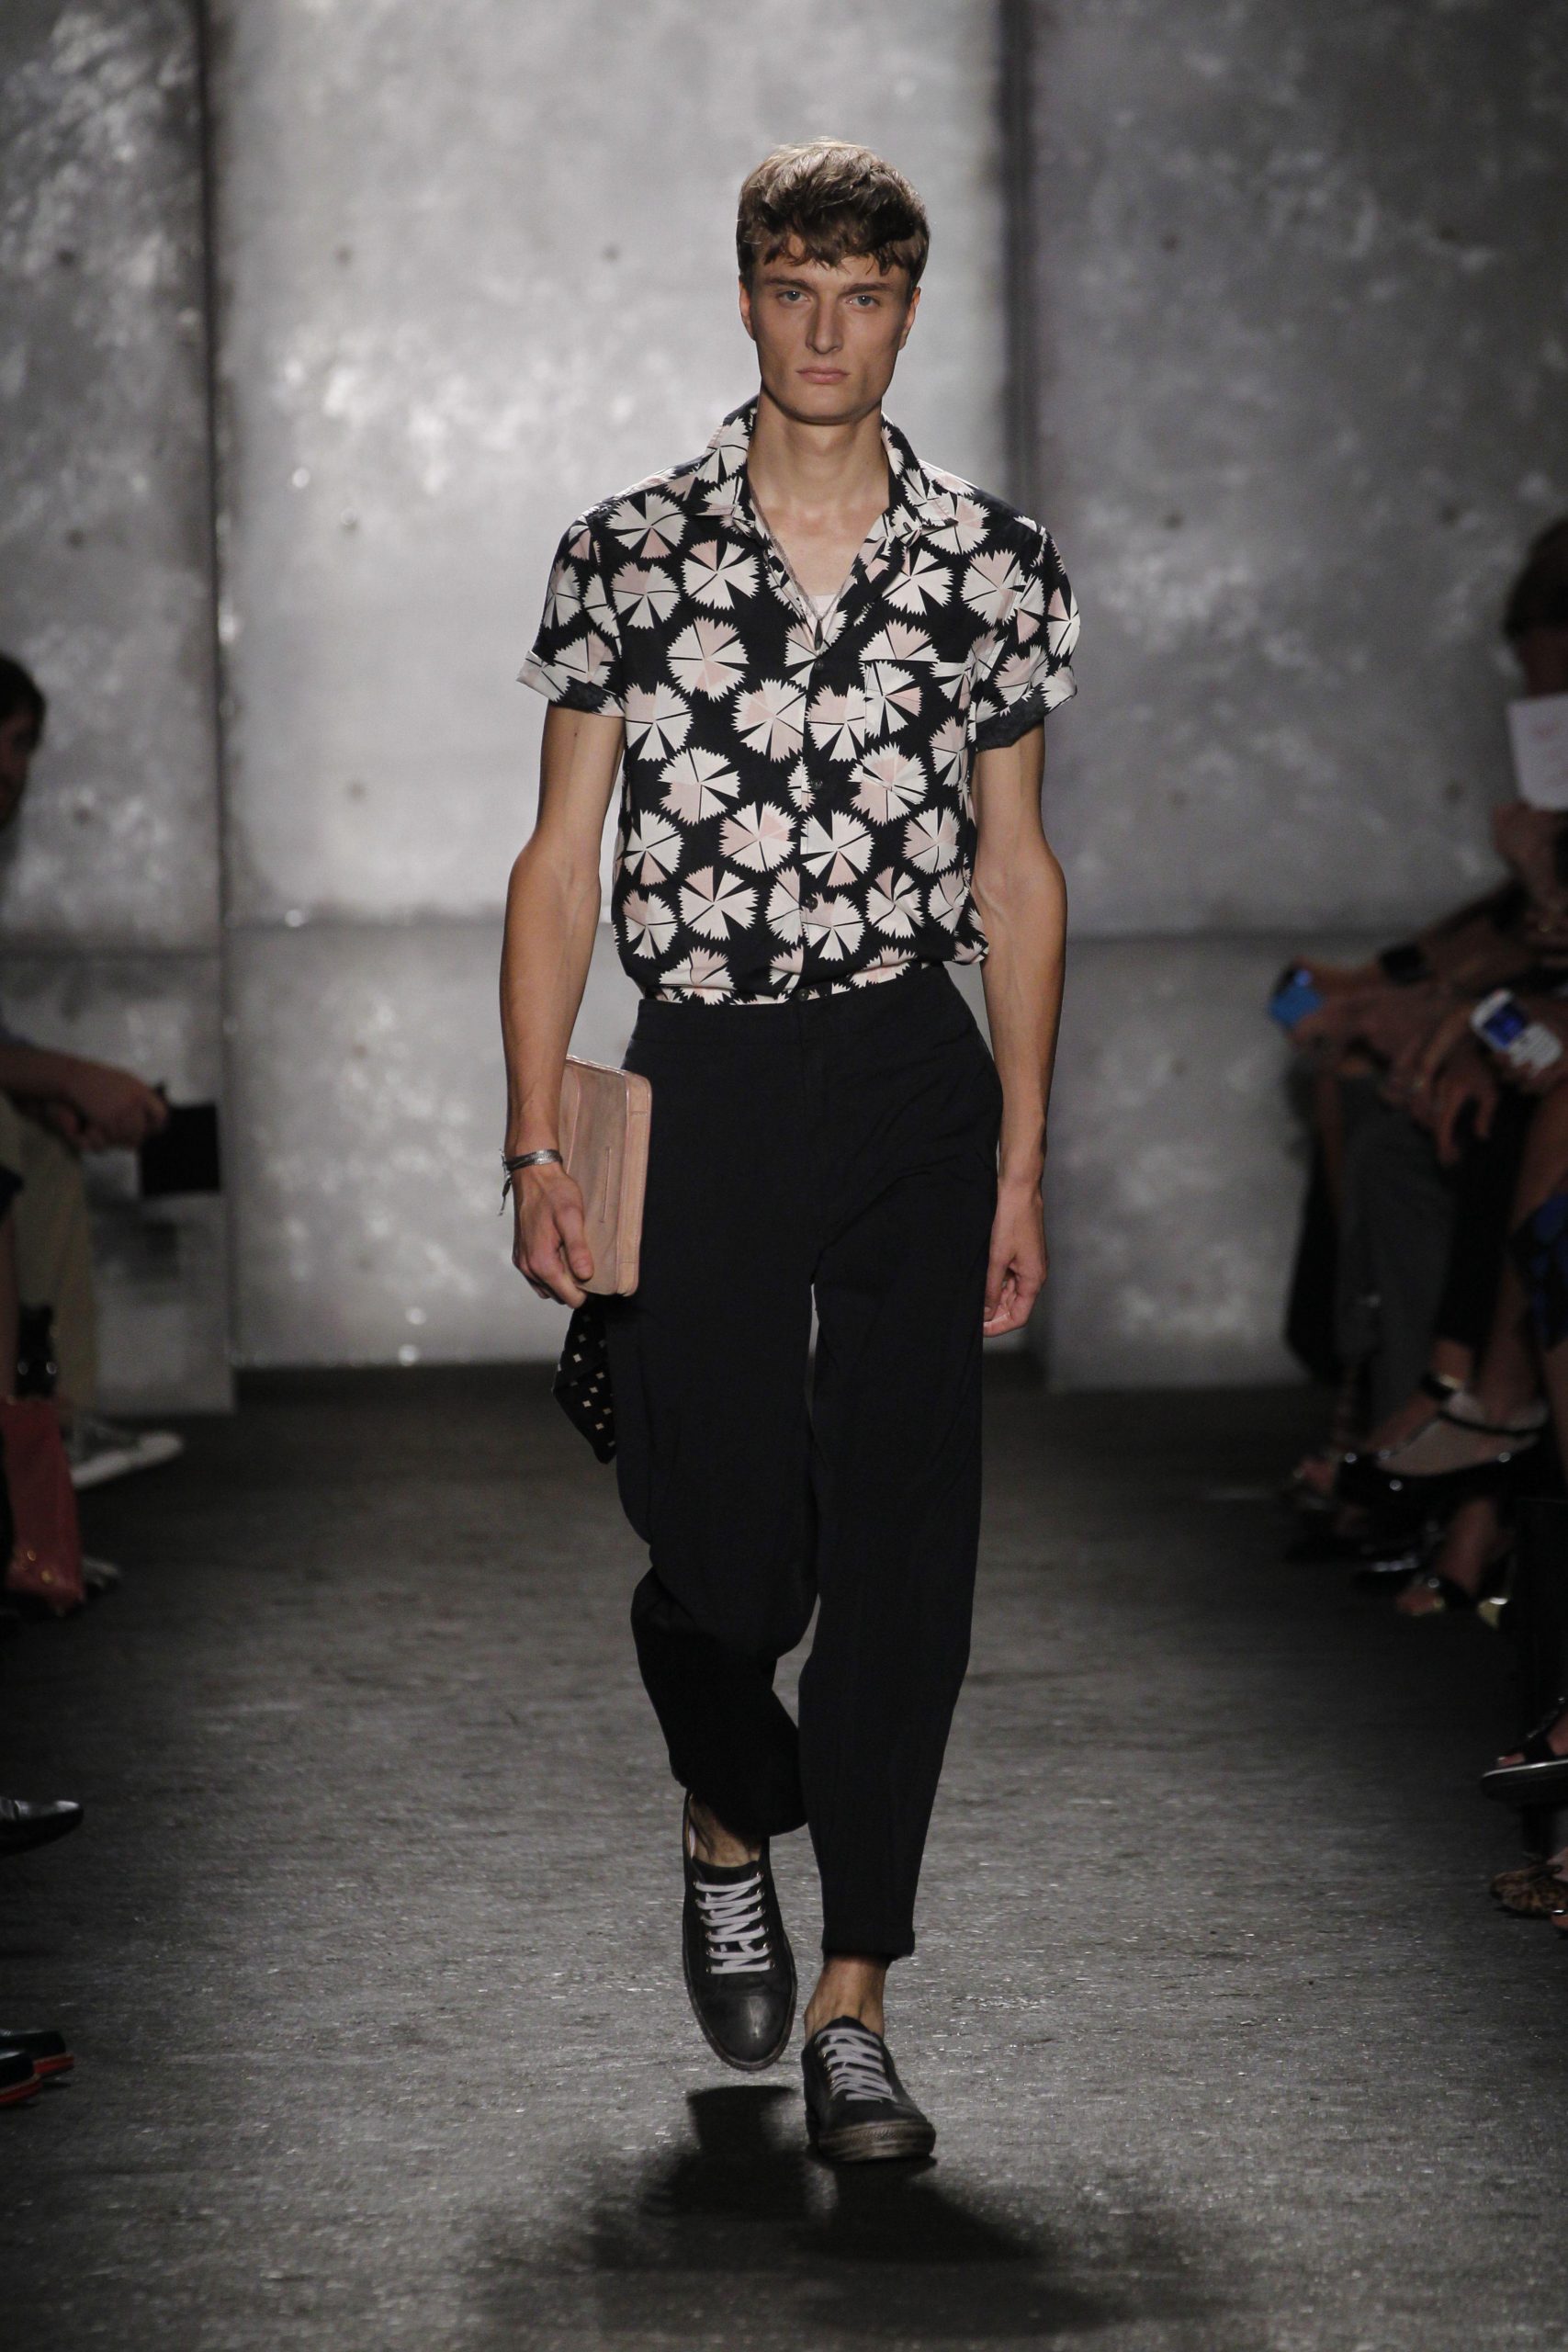 How to wear summer florals | Esquire Middle East – The Region’s Best ...